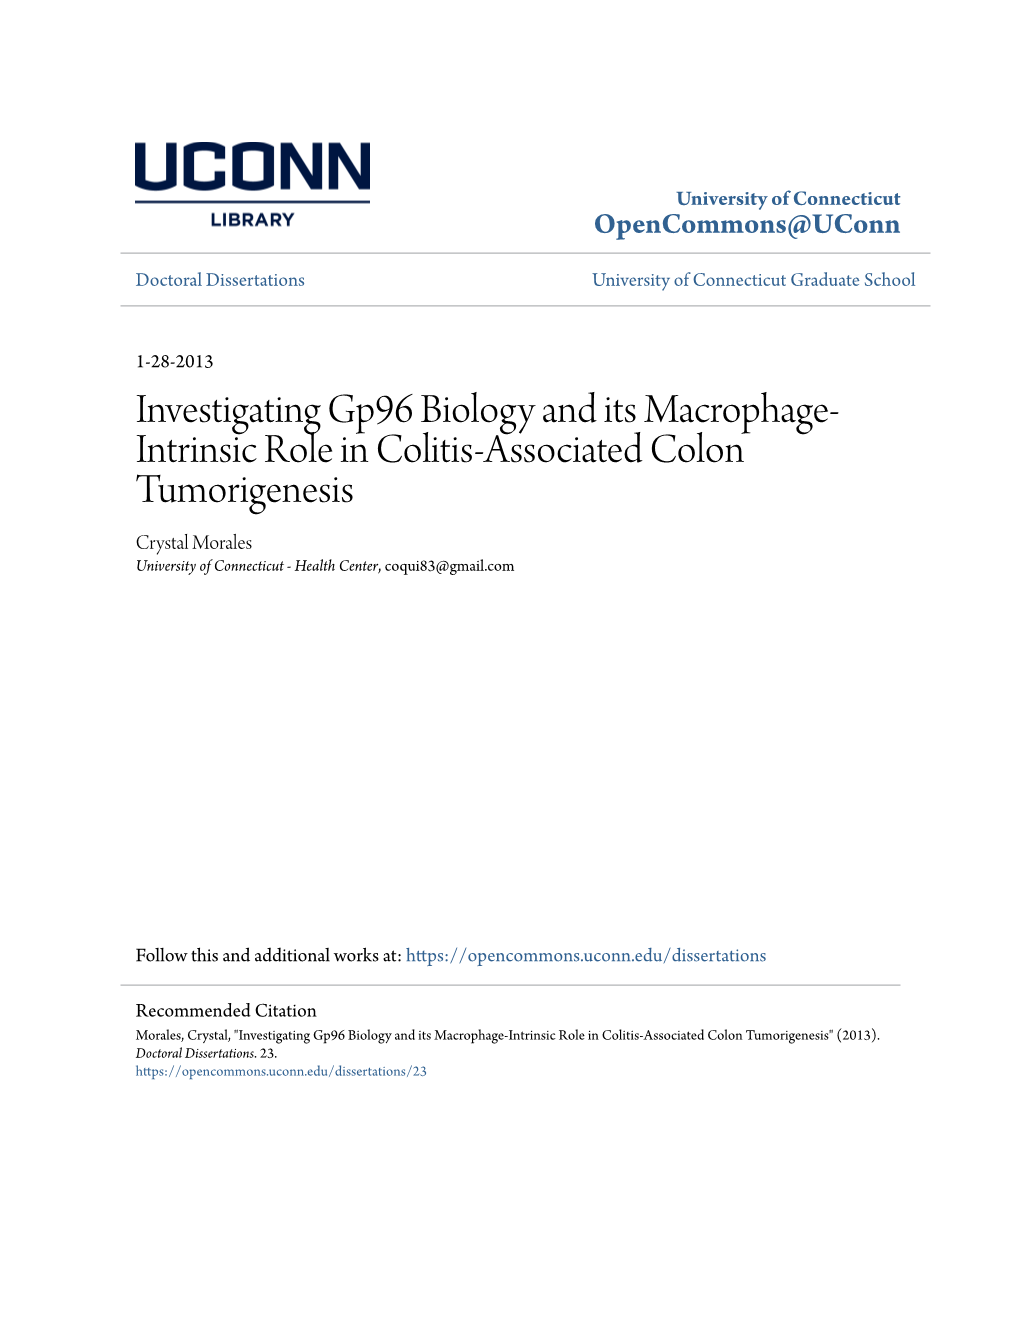 Investigating Gp96 Biology and Its Macrophage-Intrinsic Role in Colitis-Associated Colon Tumorigenesis" (2013)